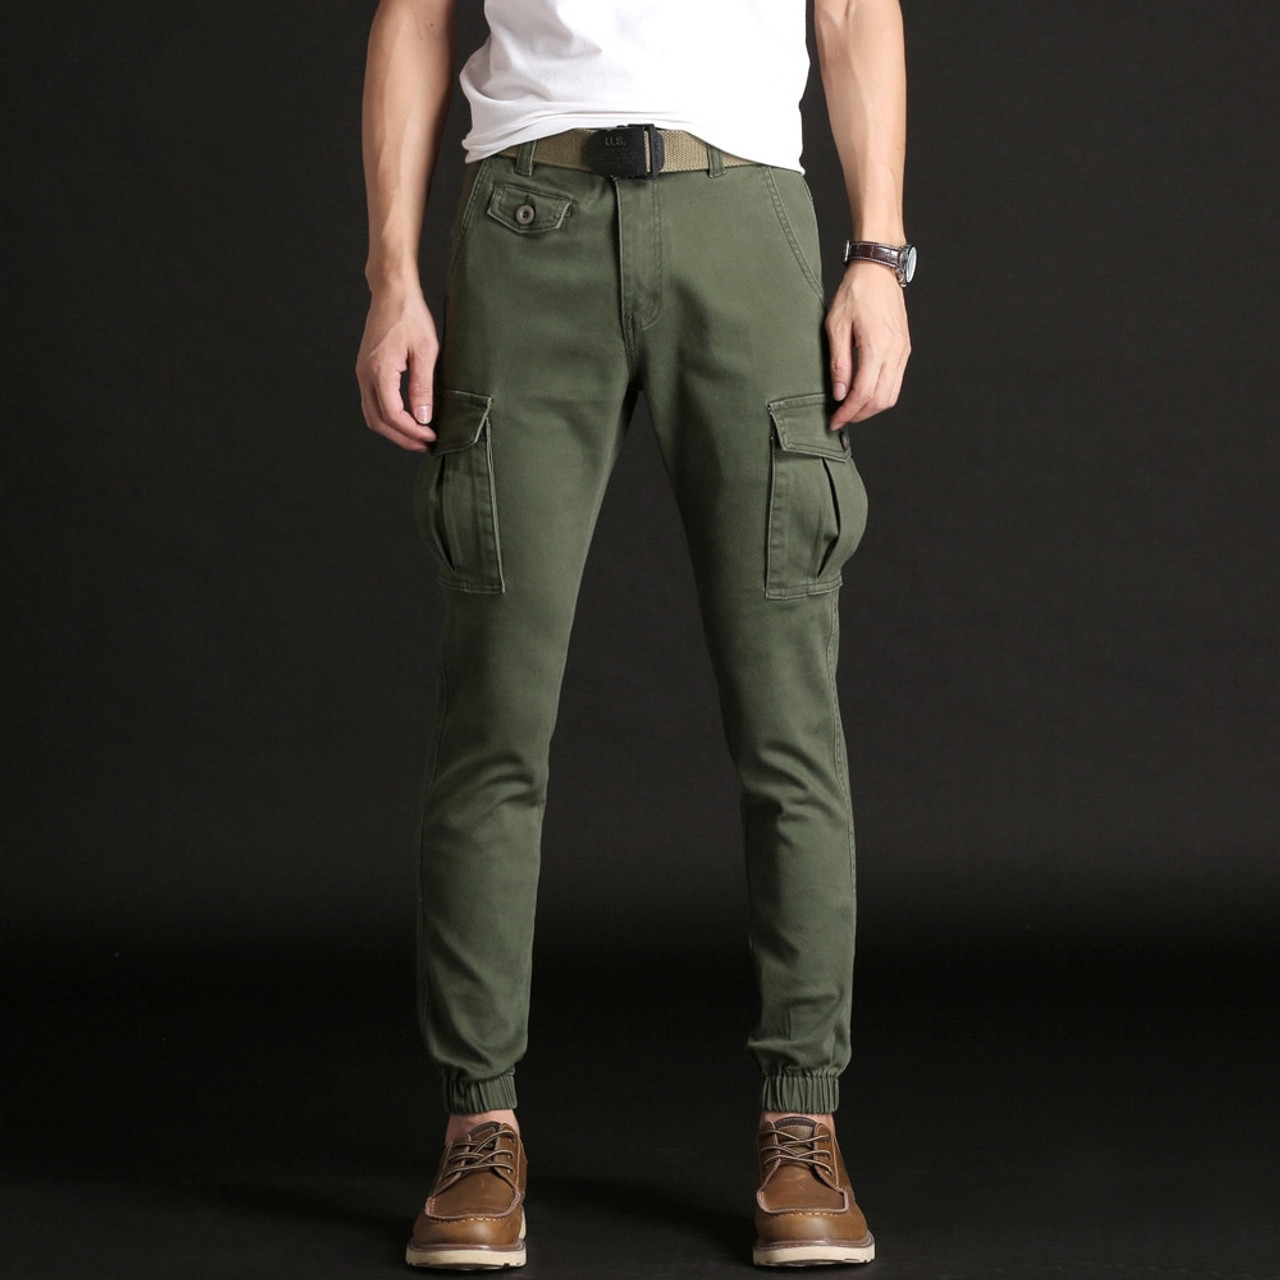 Buy zeetoo Mens Relaxed-Fit Cargo Pants Multi Pocket Military Camo Combat  Work Pants GZ03 Green Camo at Amazon.in